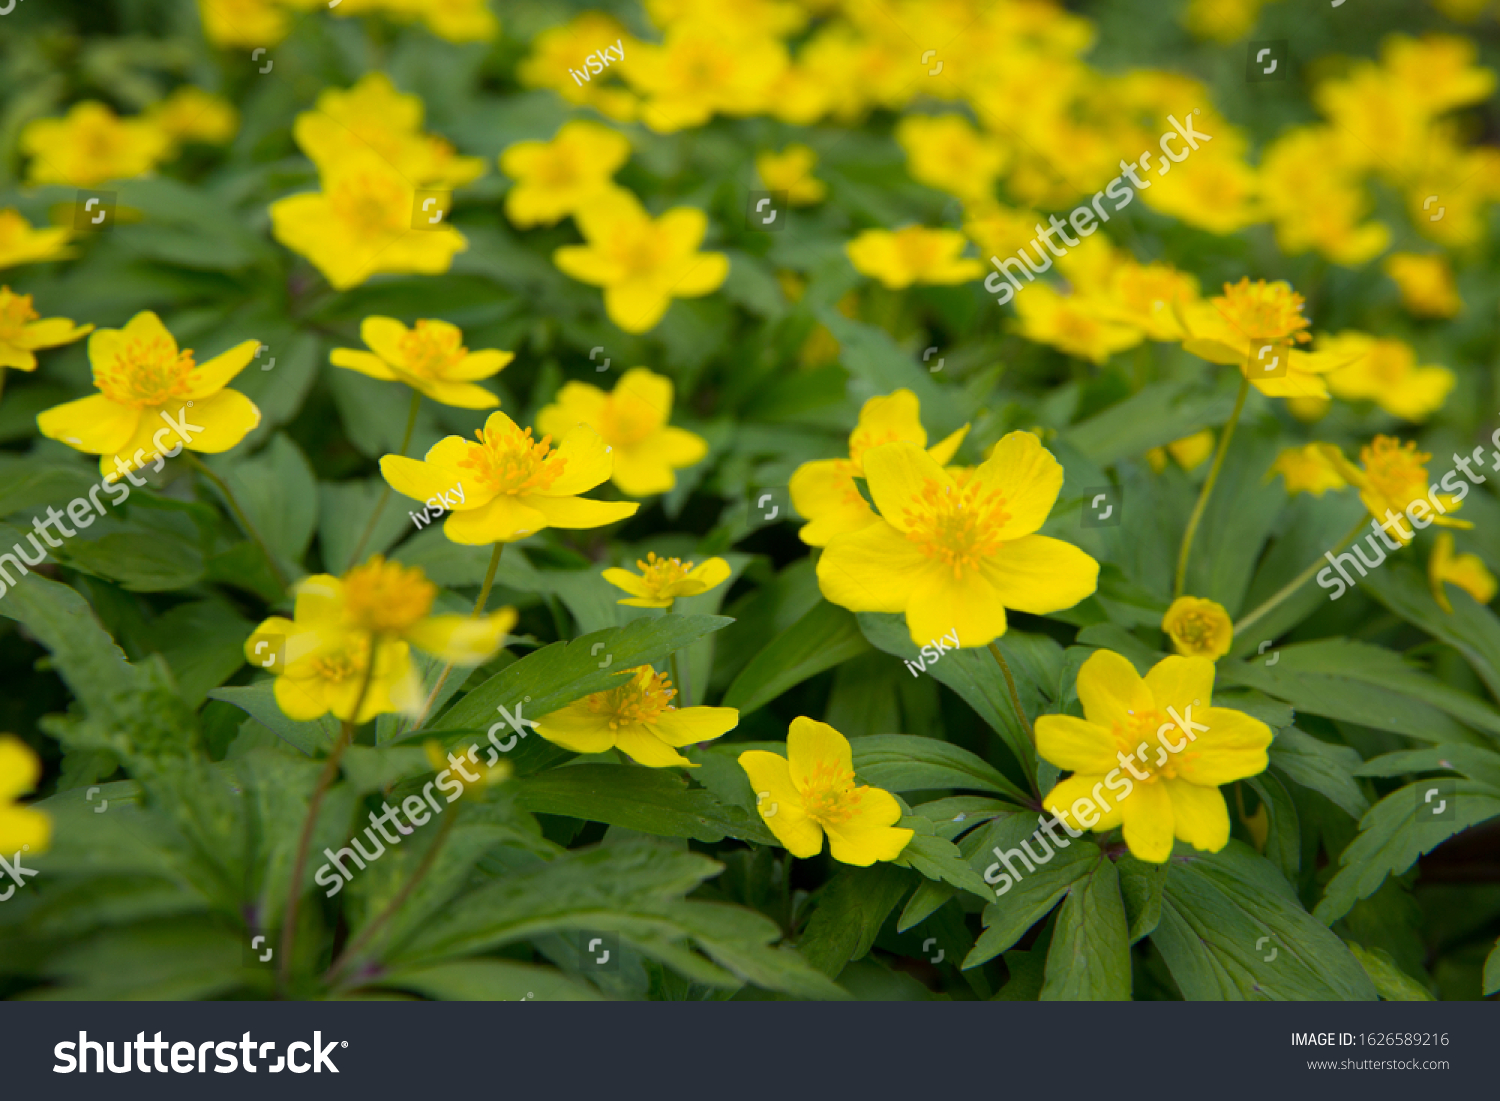 First flowers in springtime: Eranthis hyemalis. Eranthis hyemalis is a plant found in Europe, which belongs to the family Ranunculaceae. The plant is small, it has large, yellow, cup-shaped flowers. #1626589216